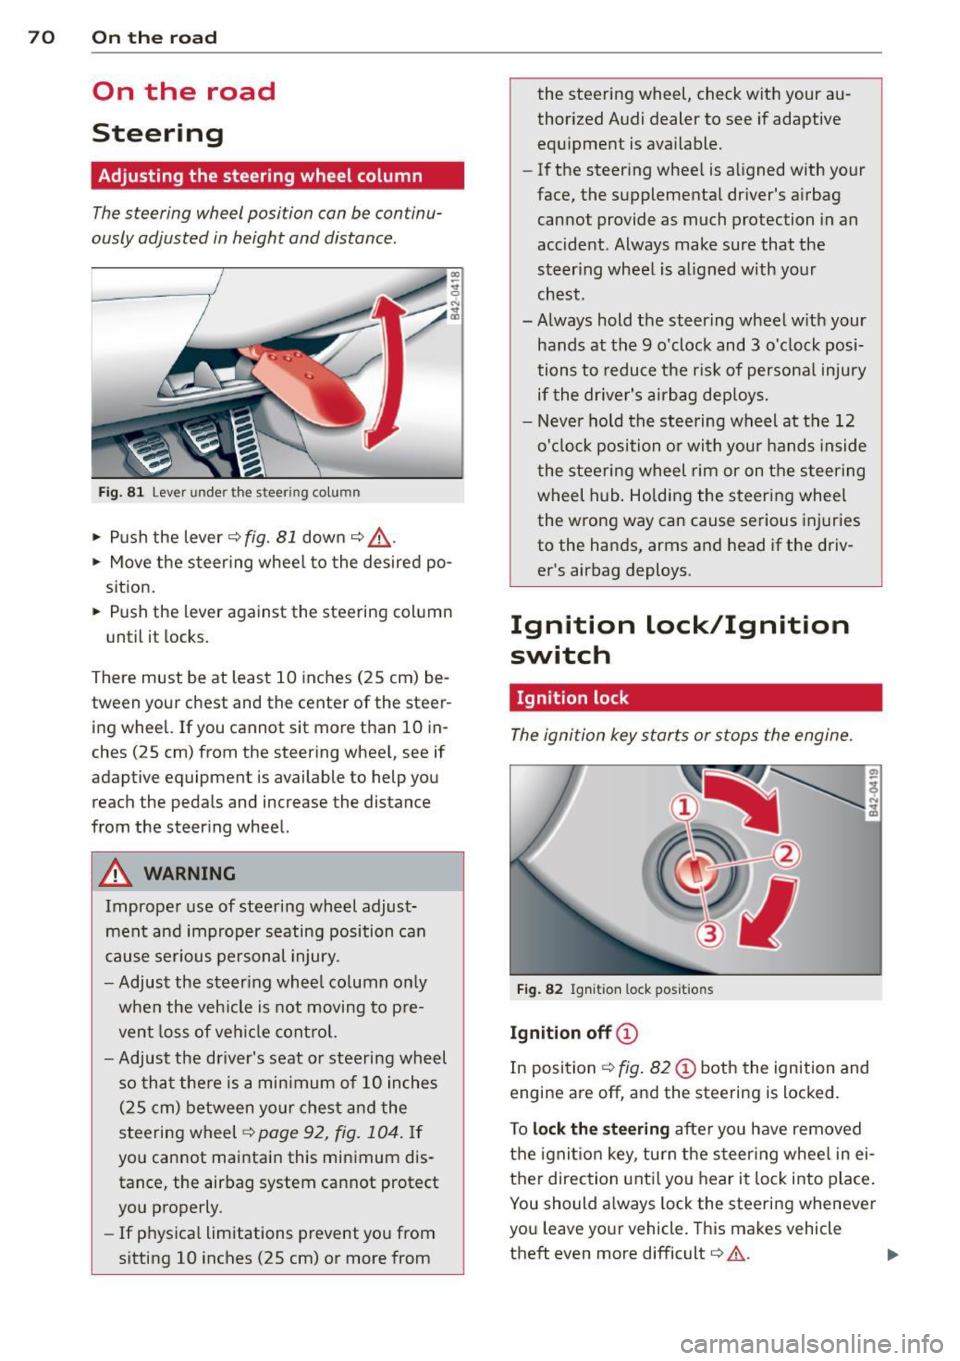 AUDI R8 SPYDER 2012  Owners Manual 70  On  the  road 
On  the  road 
Steering 
Adjusting  the  steering  wheel  column 
The steering  wheel  position  can be  continu­
ously adjusted  in height  and  distance . 
Fig. 81 Lever under th